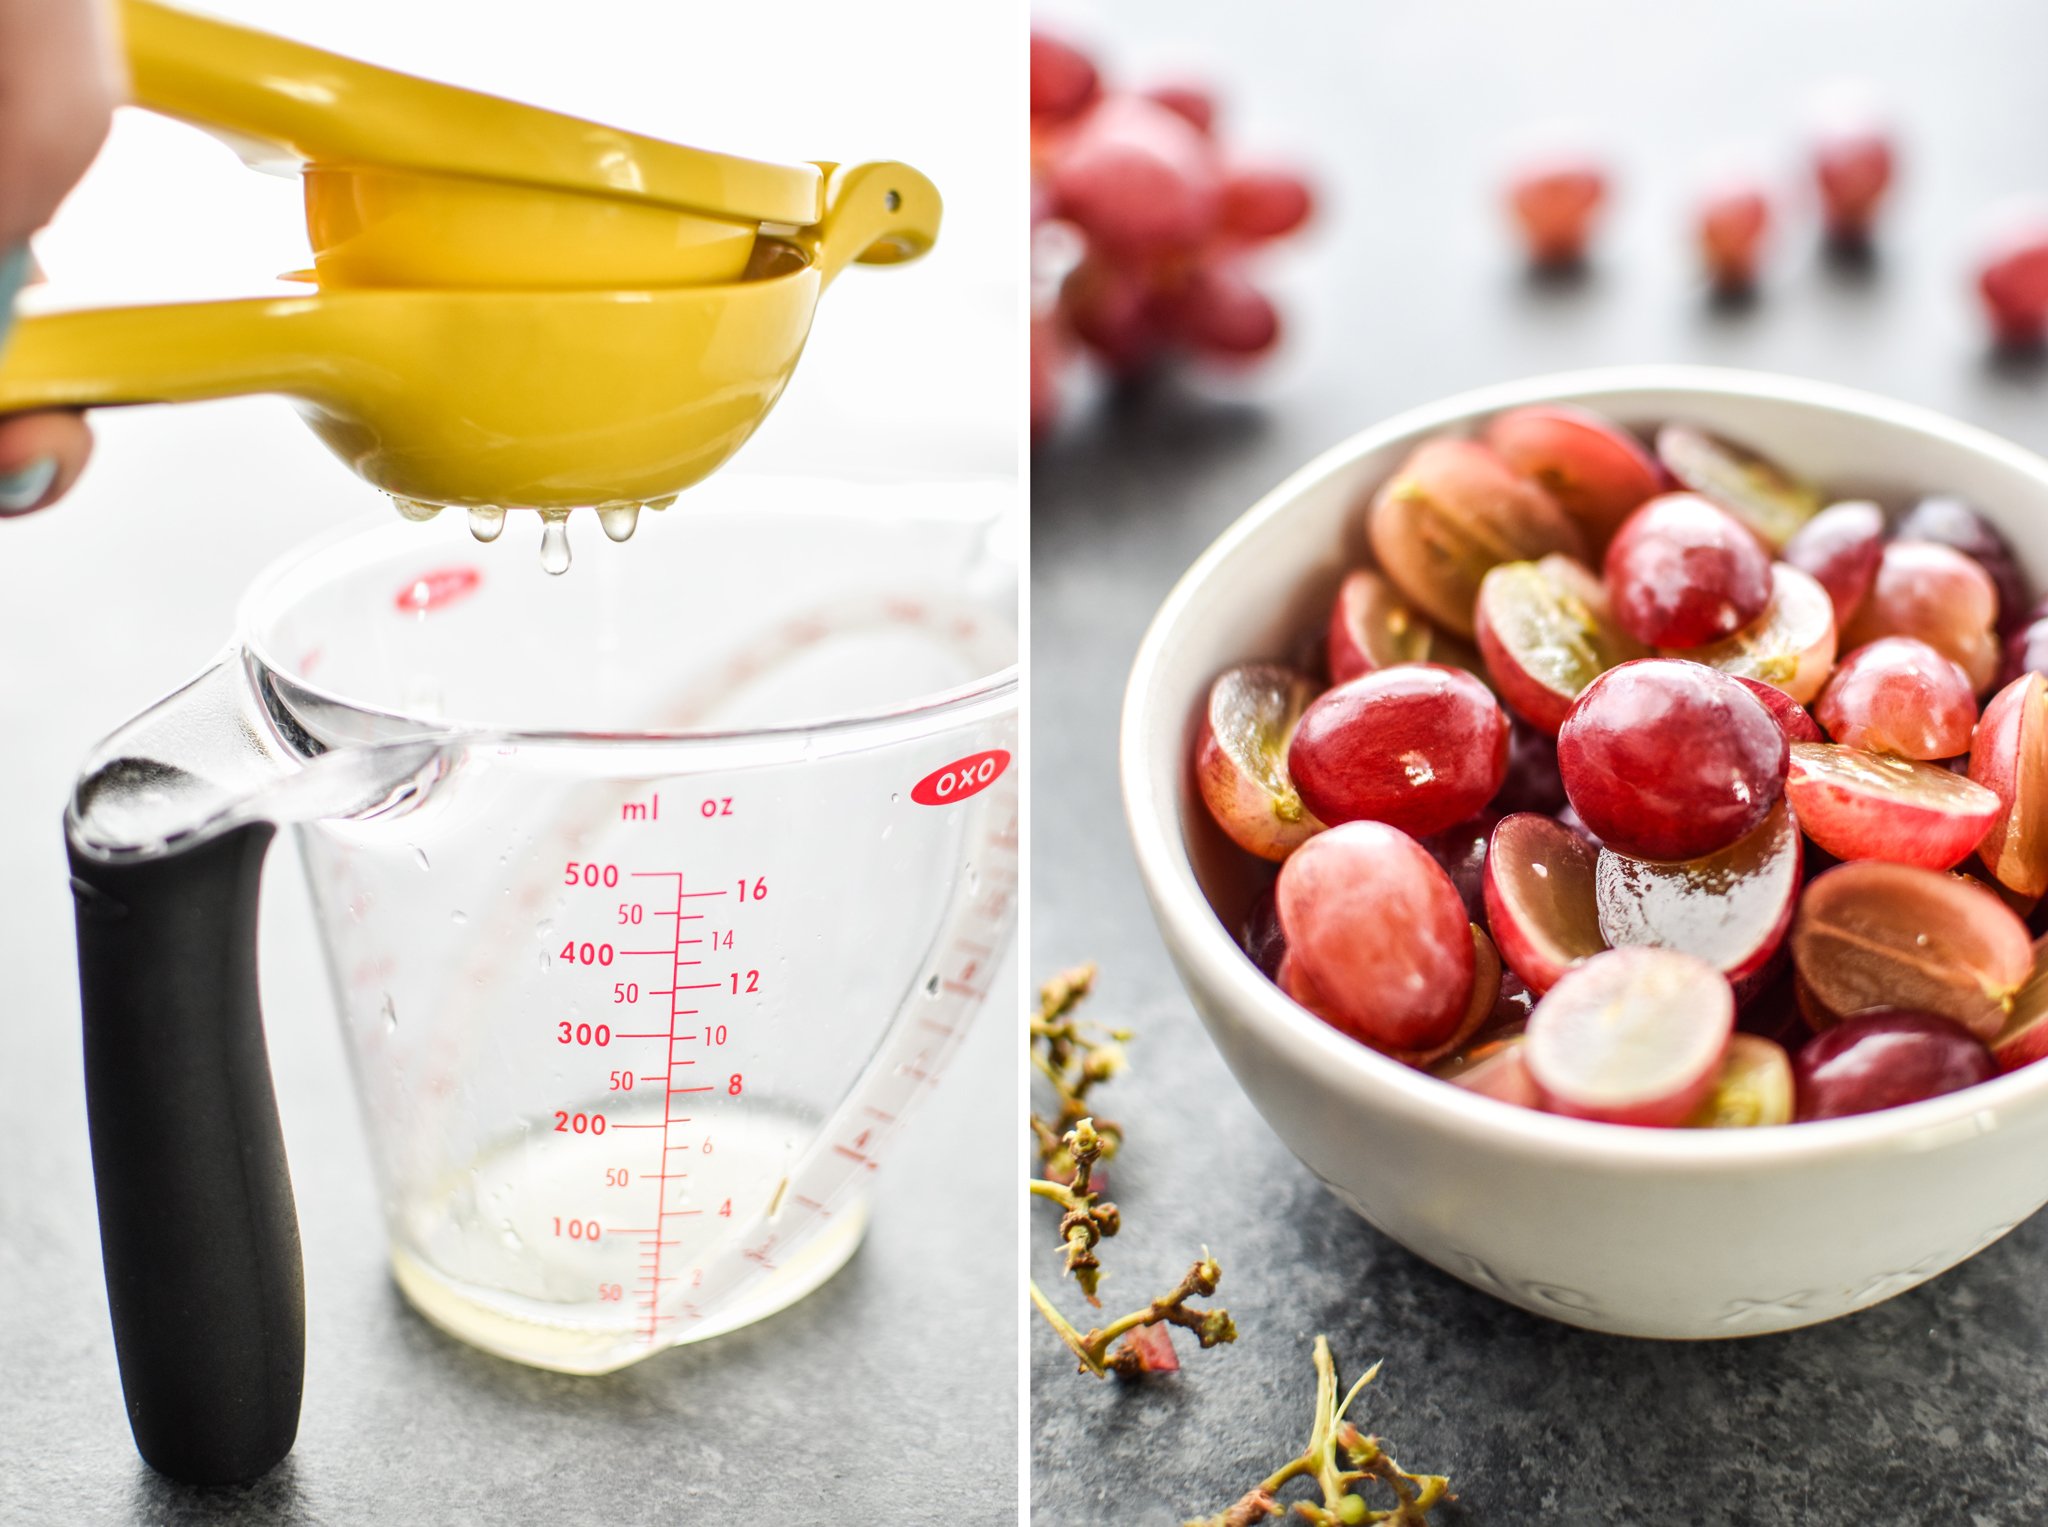 Left: Squeezing lemon juice to make the lemon poppyseed dressing. Right: Sliced grapes to be added to the salad.